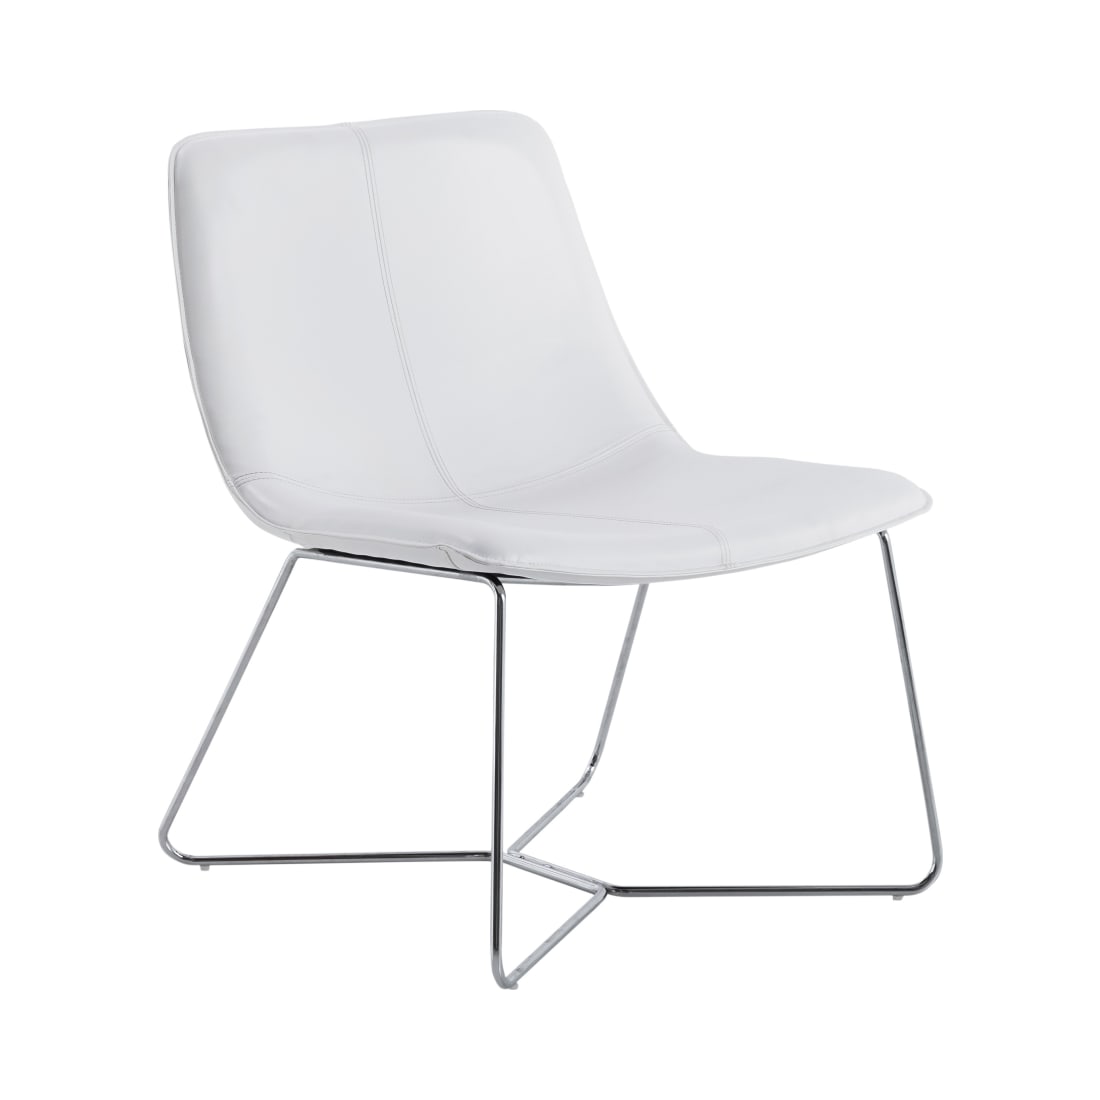 Grayson Accent Chair in White Faux Leather with Chrome Base